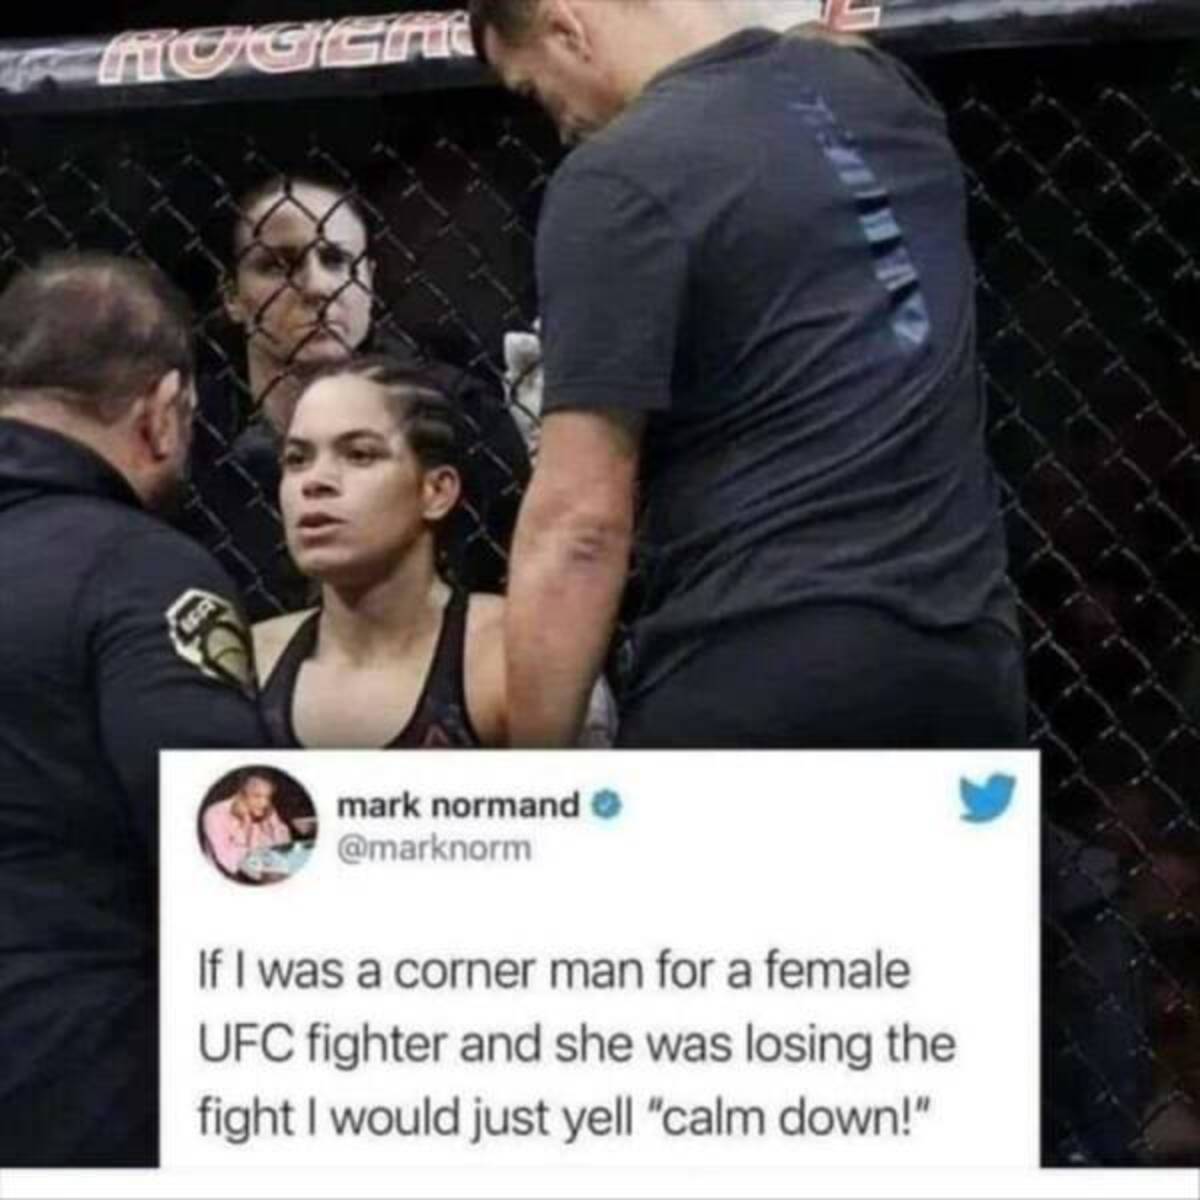 photo caption - Hoger Ok mark normand If I was a corner man for a female Ufc fighter and she was losing the fight I would just yell "calm down!"